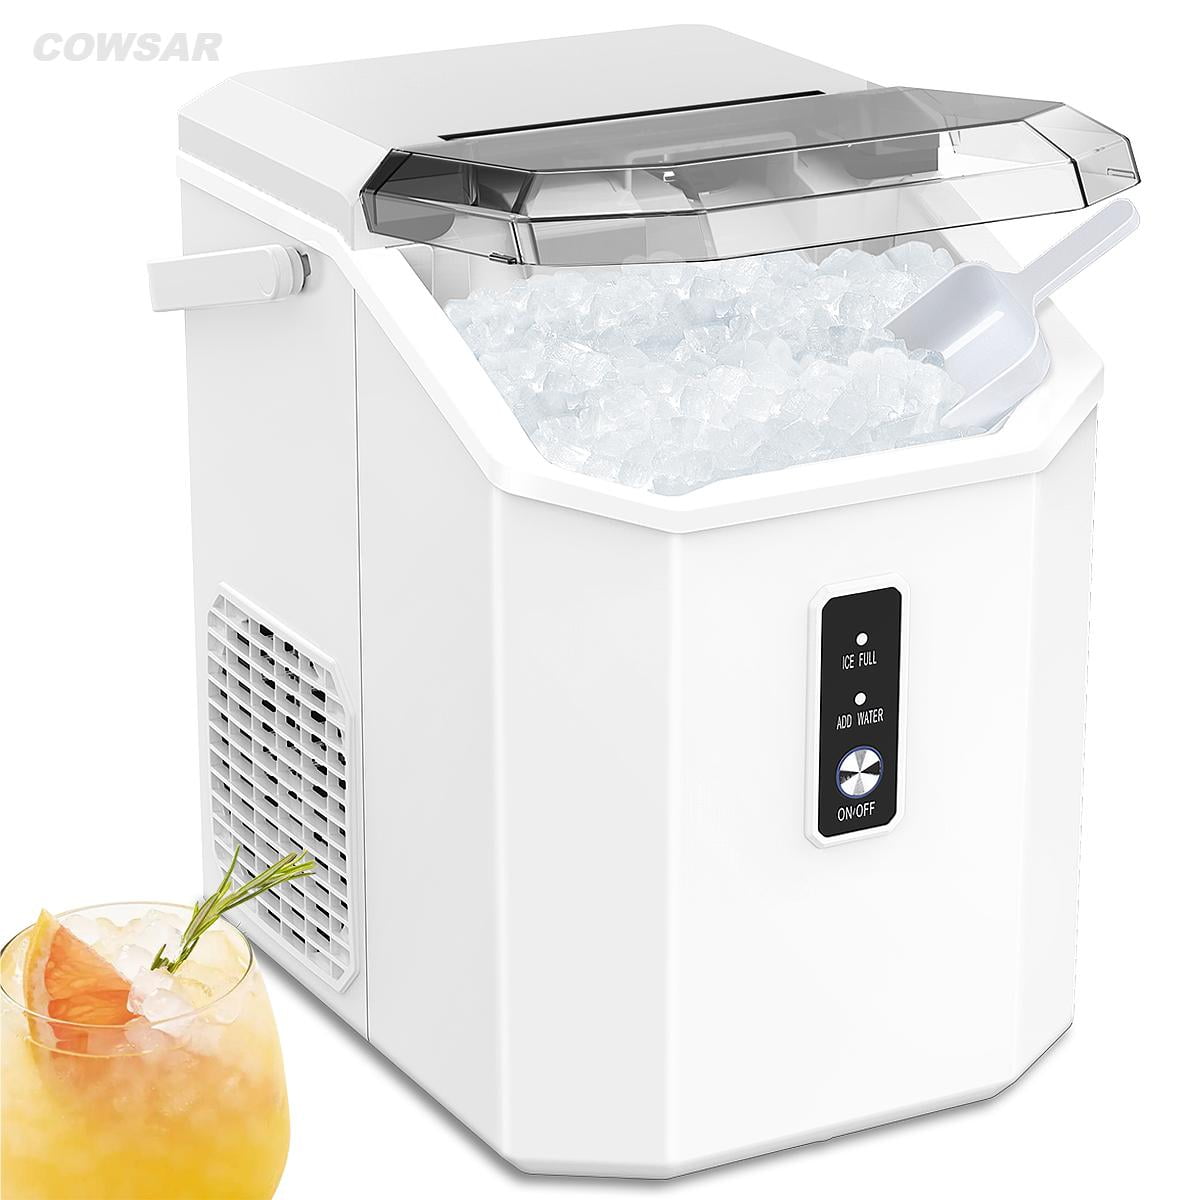  COWSAR Nugget Ice Maker Countertop, Chewable Pebble